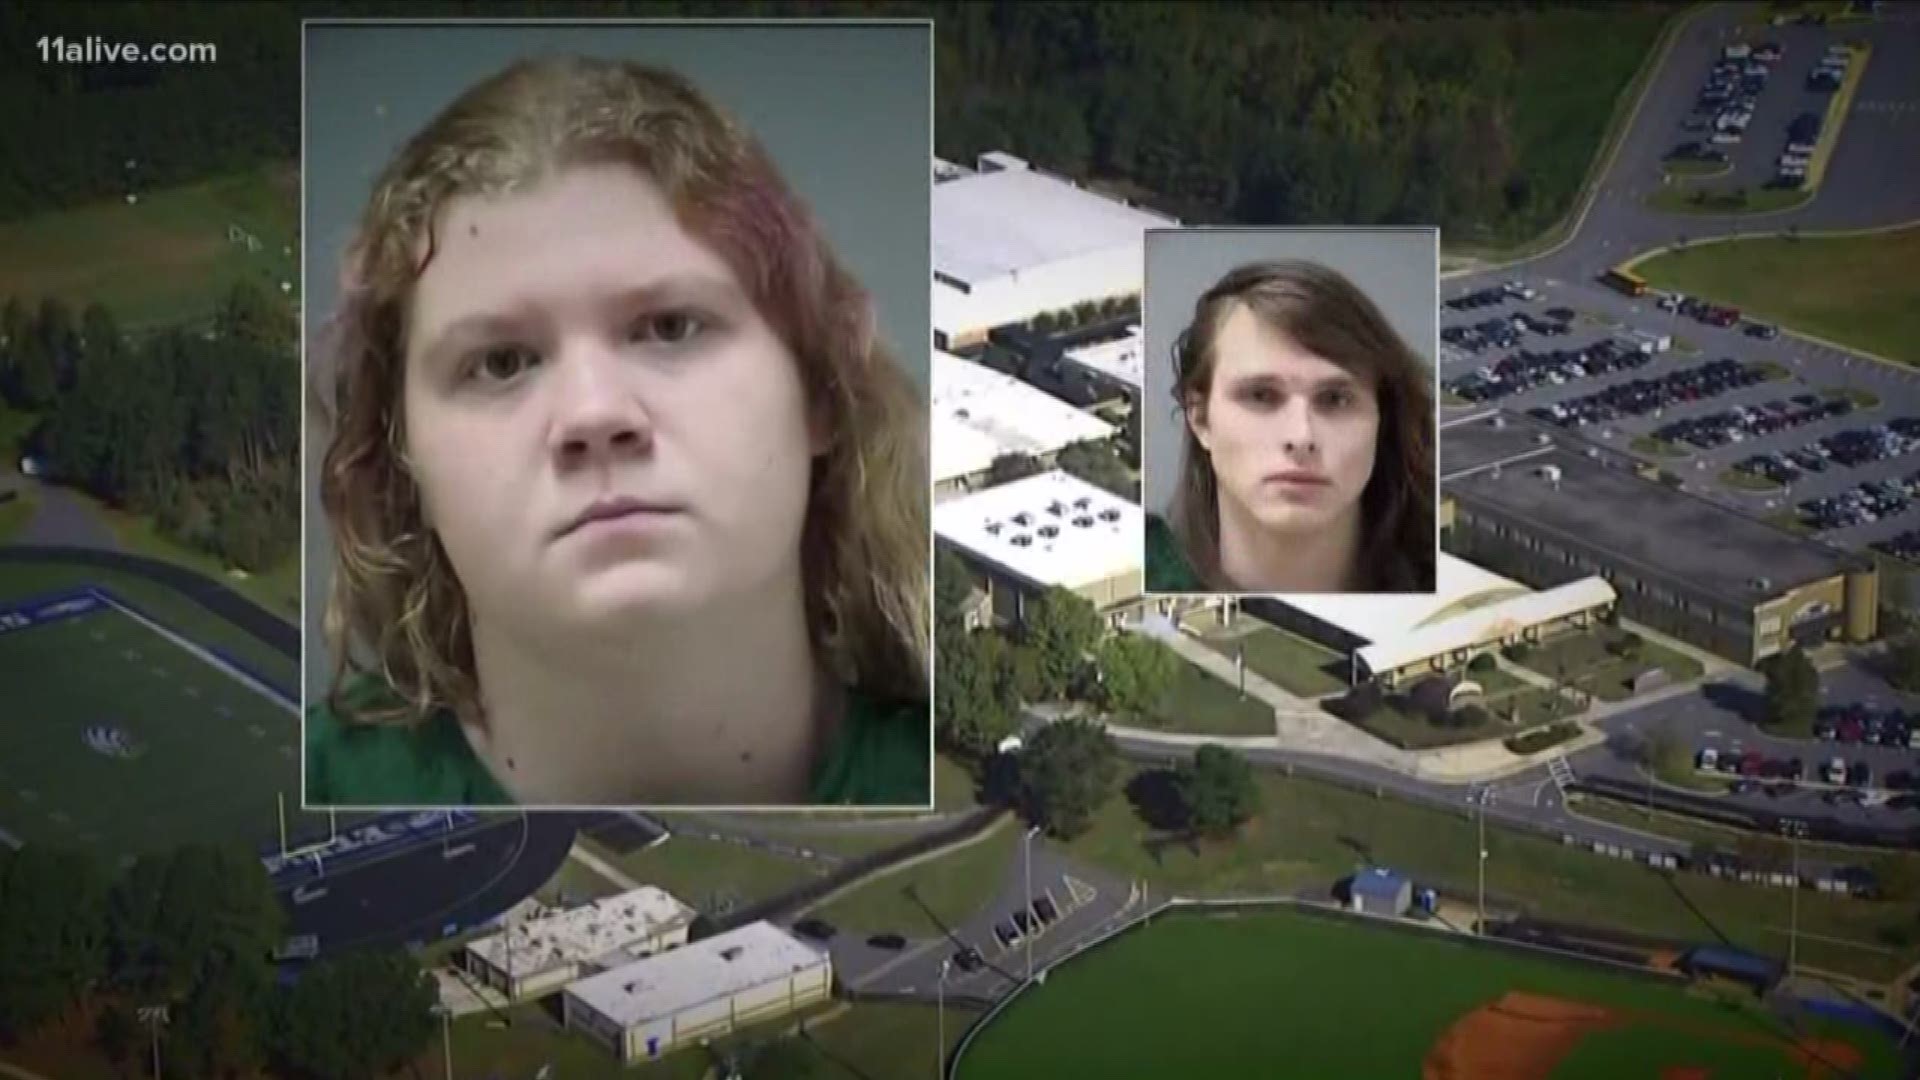 Those teens pleaded guilty to six counts in connection with plans uncovered in October 2017 to attack Etowah High School in what has been compared to the deadly attack on Colorado's Columbine High School in 1999.